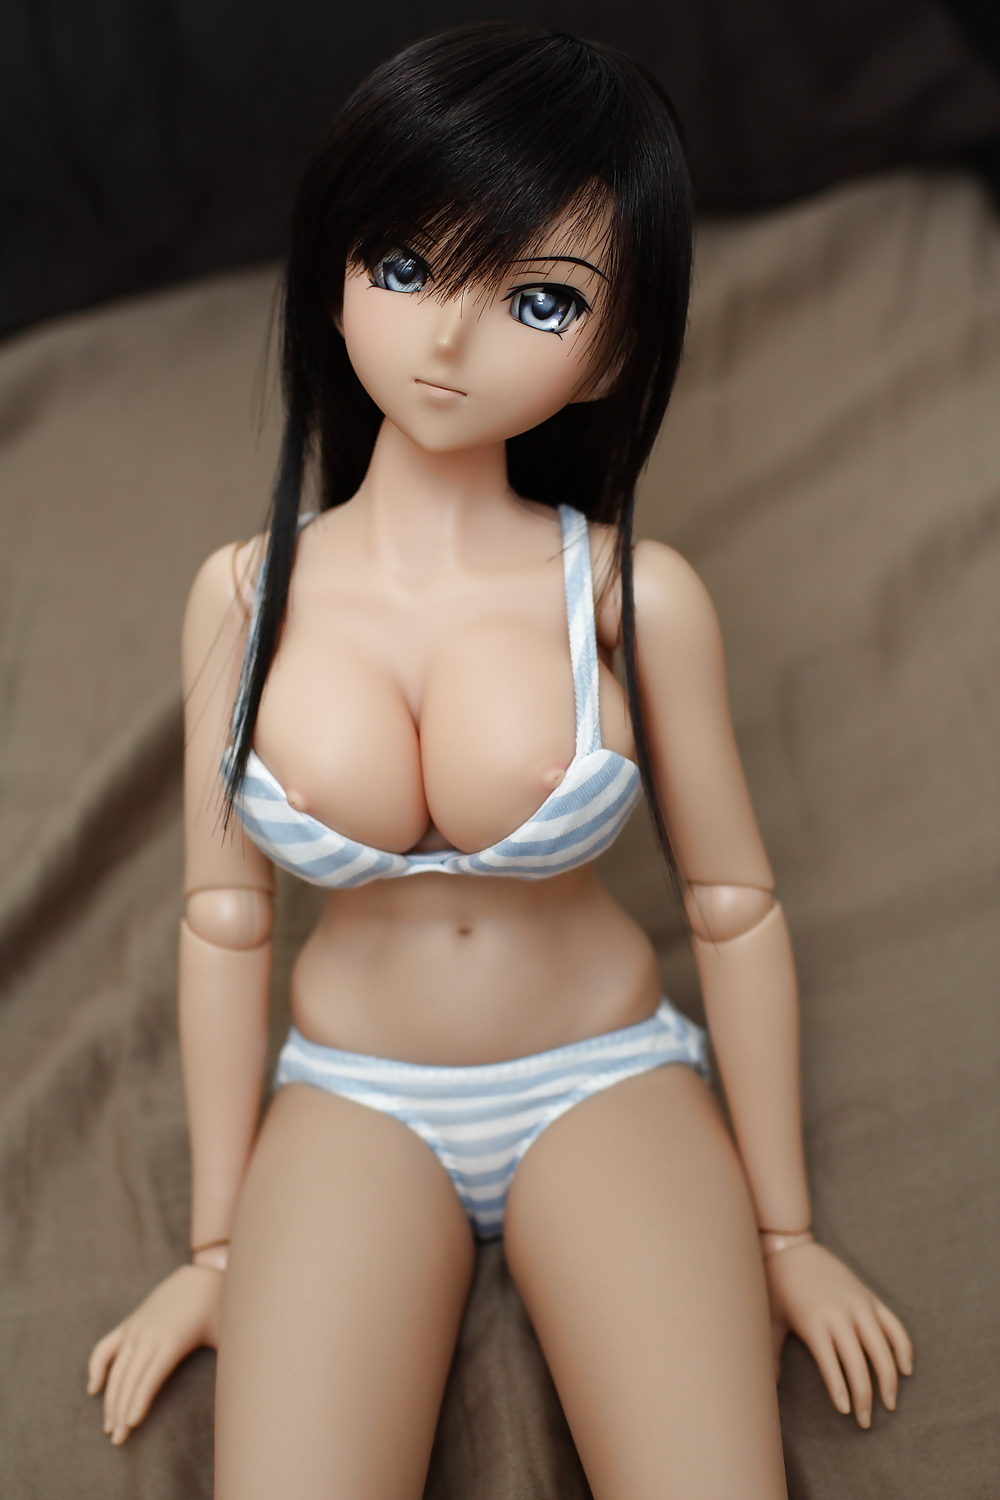 Other People's Dolls 2: Big Tits #36089284